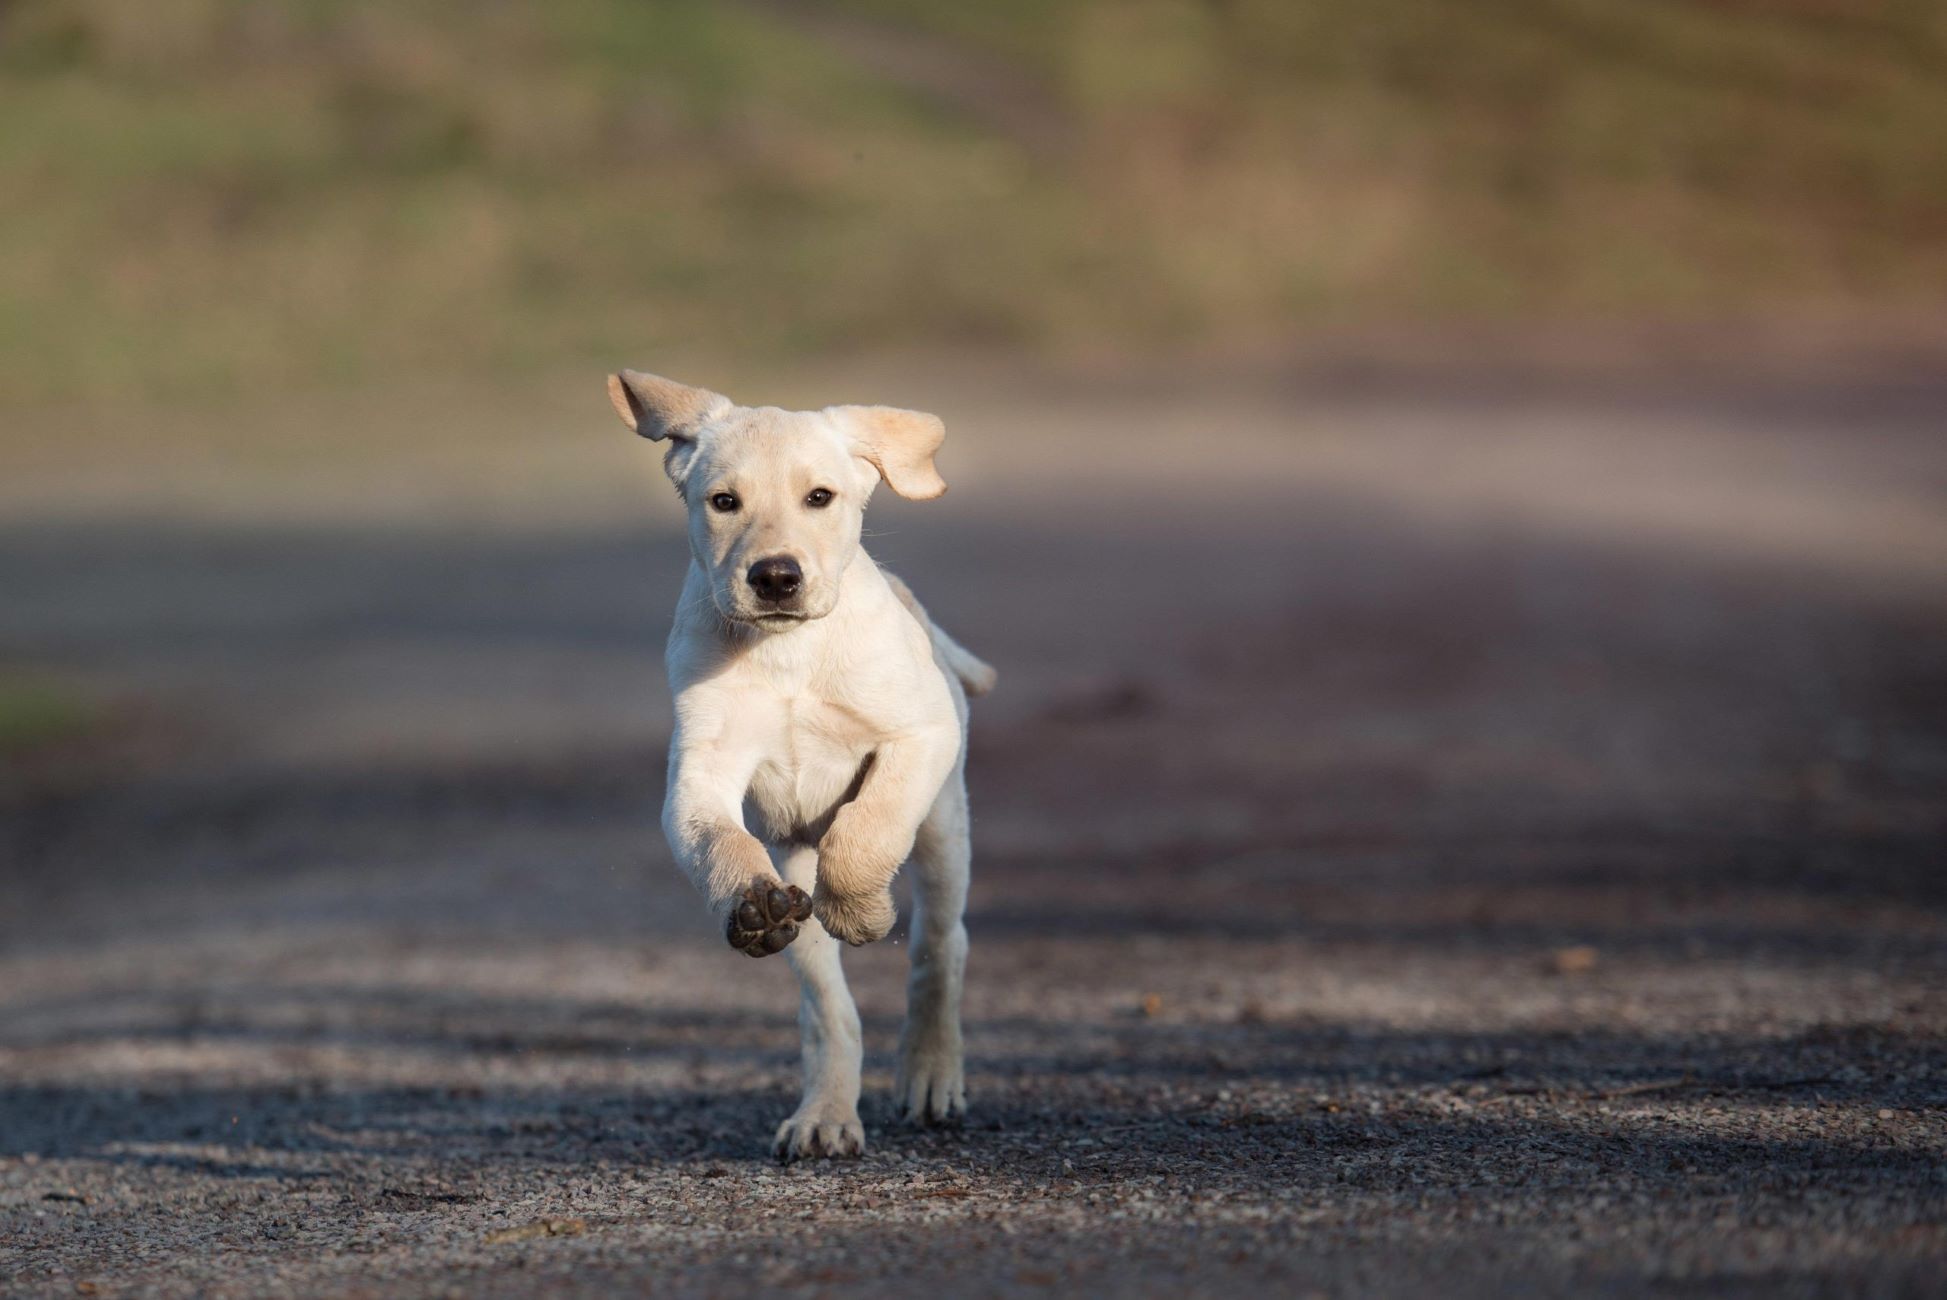 10 Strategies For Dealing With Unwanted Attention From Dogs While Running